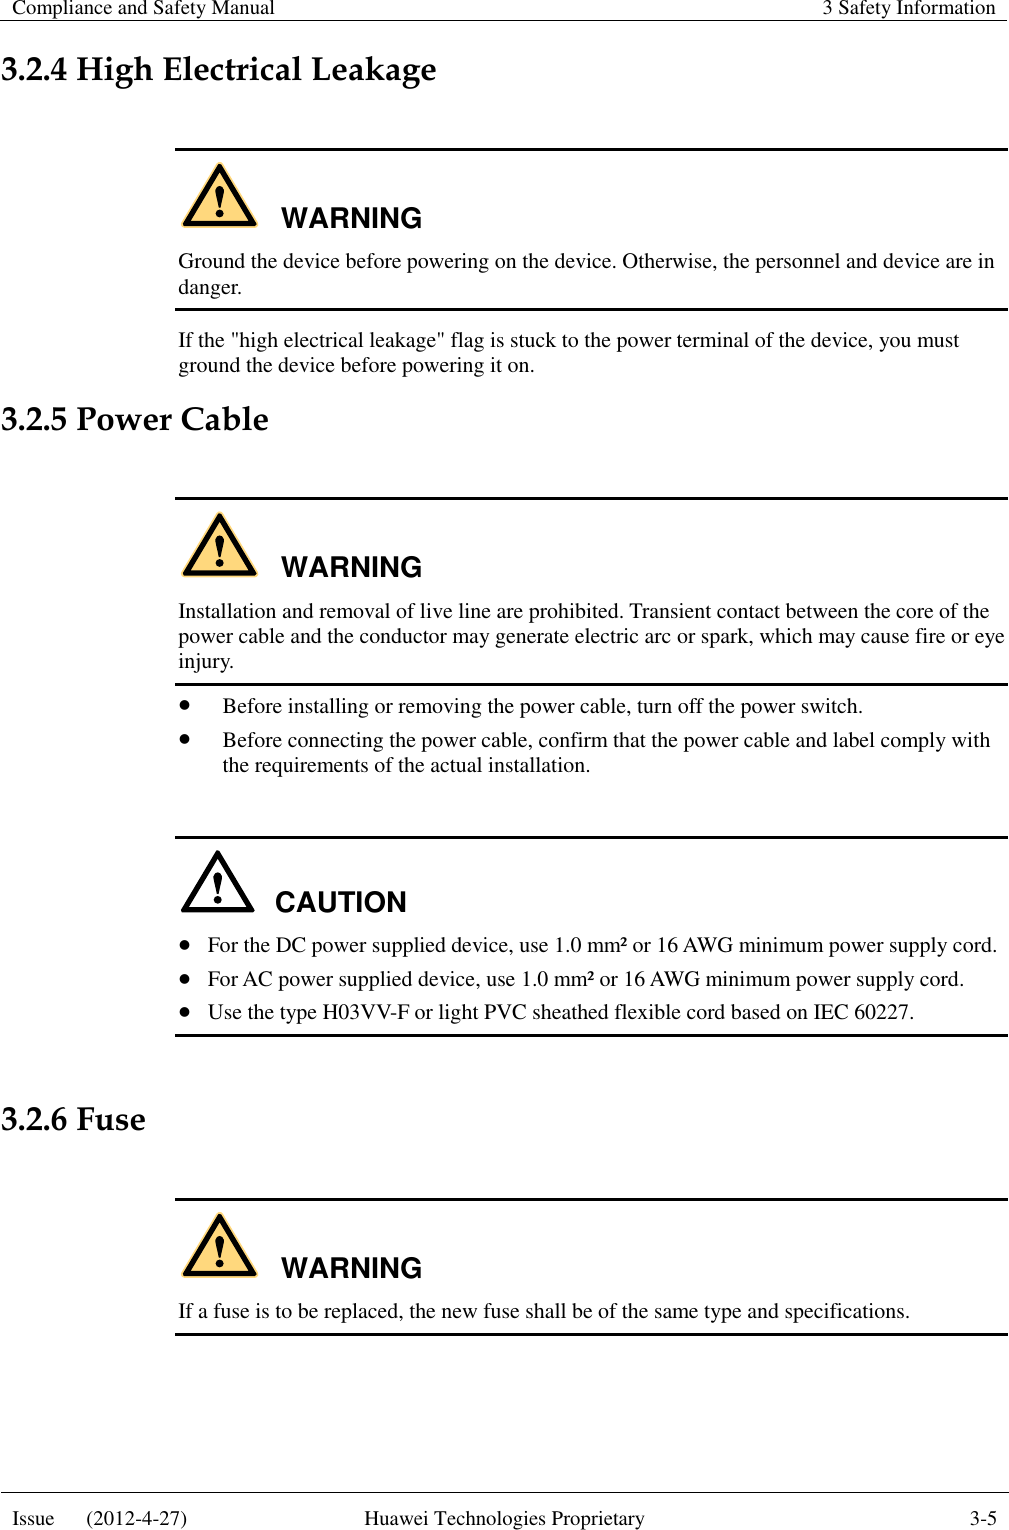 Compliance and Safety Manual 3 Safety Information  Issue      (2012-4-27) Huawei Technologies Proprietary 3-5  3.2.4 High Electrical Leakage  WARNING Ground the device before powering on the device. Otherwise, the personnel and device are in danger. If the &quot;high electrical leakage&quot; flag is stuck to the power terminal of the device, you must ground the device before powering it on. 3.2.5 Power Cable  WARNING Installation and removal of live line are prohibited. Transient contact between the core of the power cable and the conductor may generate electric arc or spark, which may cause fire or eye injury.  Before installing or removing the power cable, turn off the power switch.  Before connecting the power cable, confirm that the power cable and label comply with the requirements of the actual installation.  CAUTION  For the DC power supplied device, use 1.0 mm² or 16 AWG minimum power supply cord.  For AC power supplied device, use 1.0 mm² or 16 AWG minimum power supply cord.  Use the type H03VV-F or light PVC sheathed flexible cord based on IEC 60227.  3.2.6 Fuse  WARNING If a fuse is to be replaced, the new fuse shall be of the same type and specifications.  